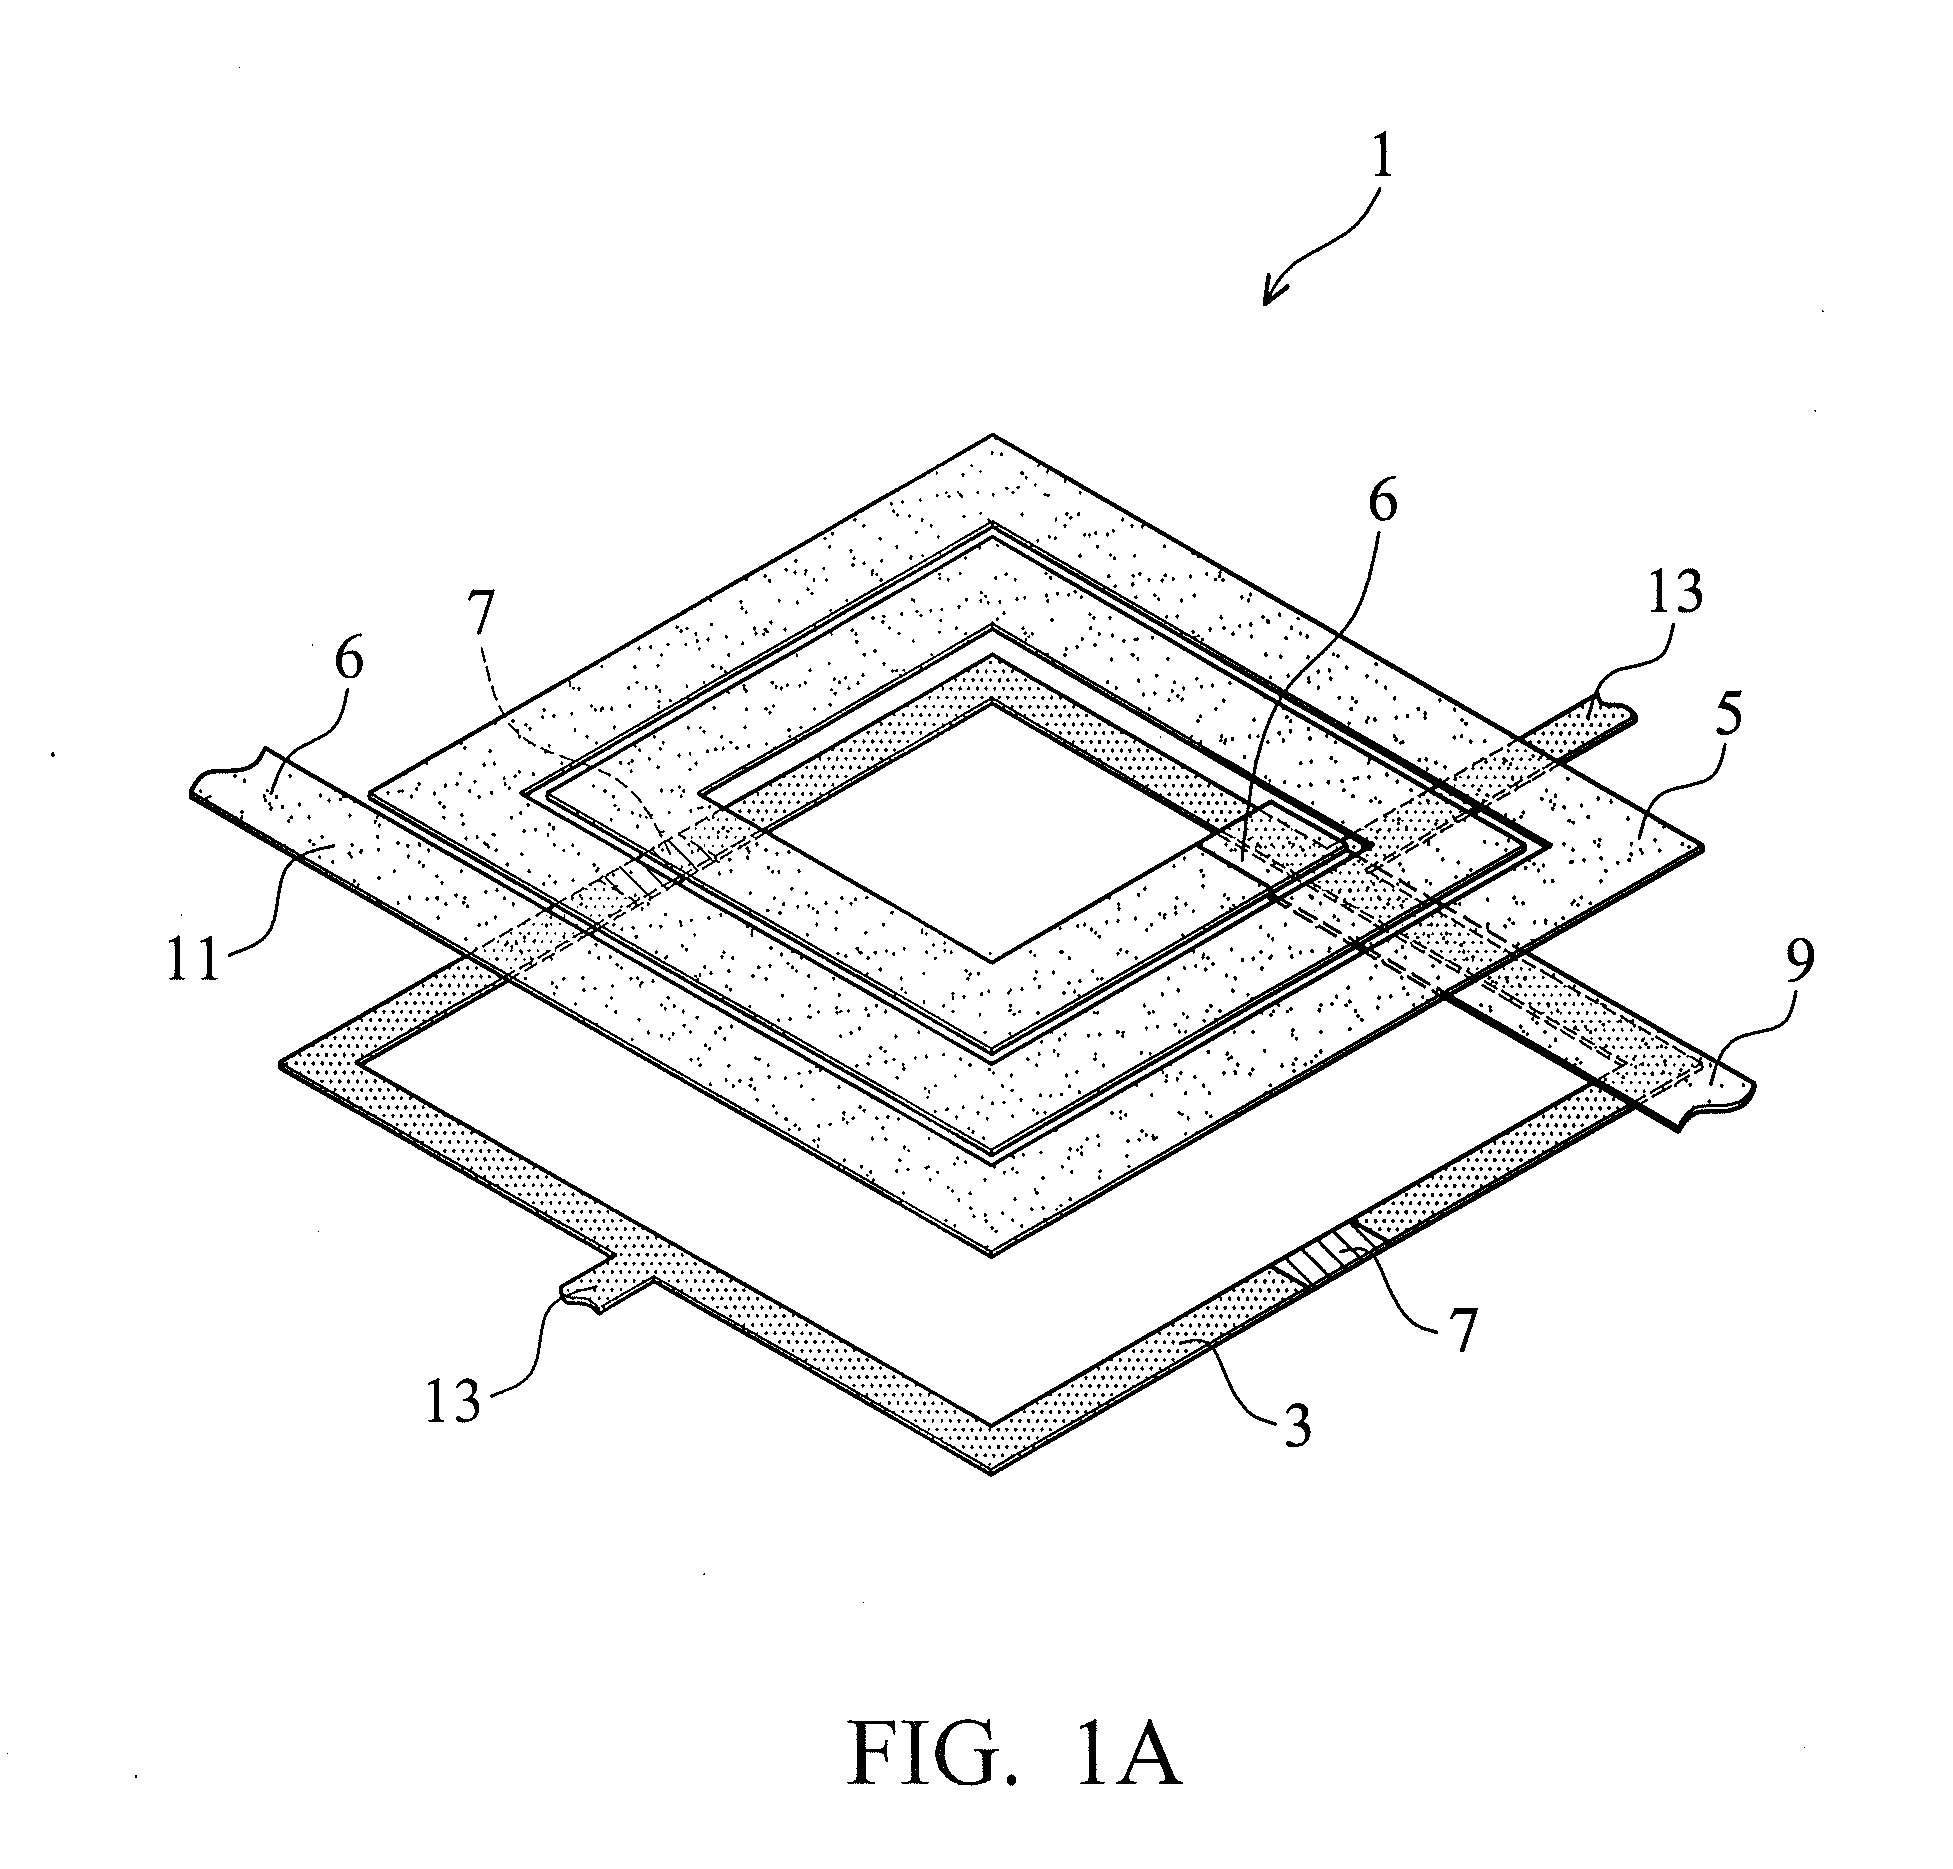 Continuously tunable inductor with variable resistors